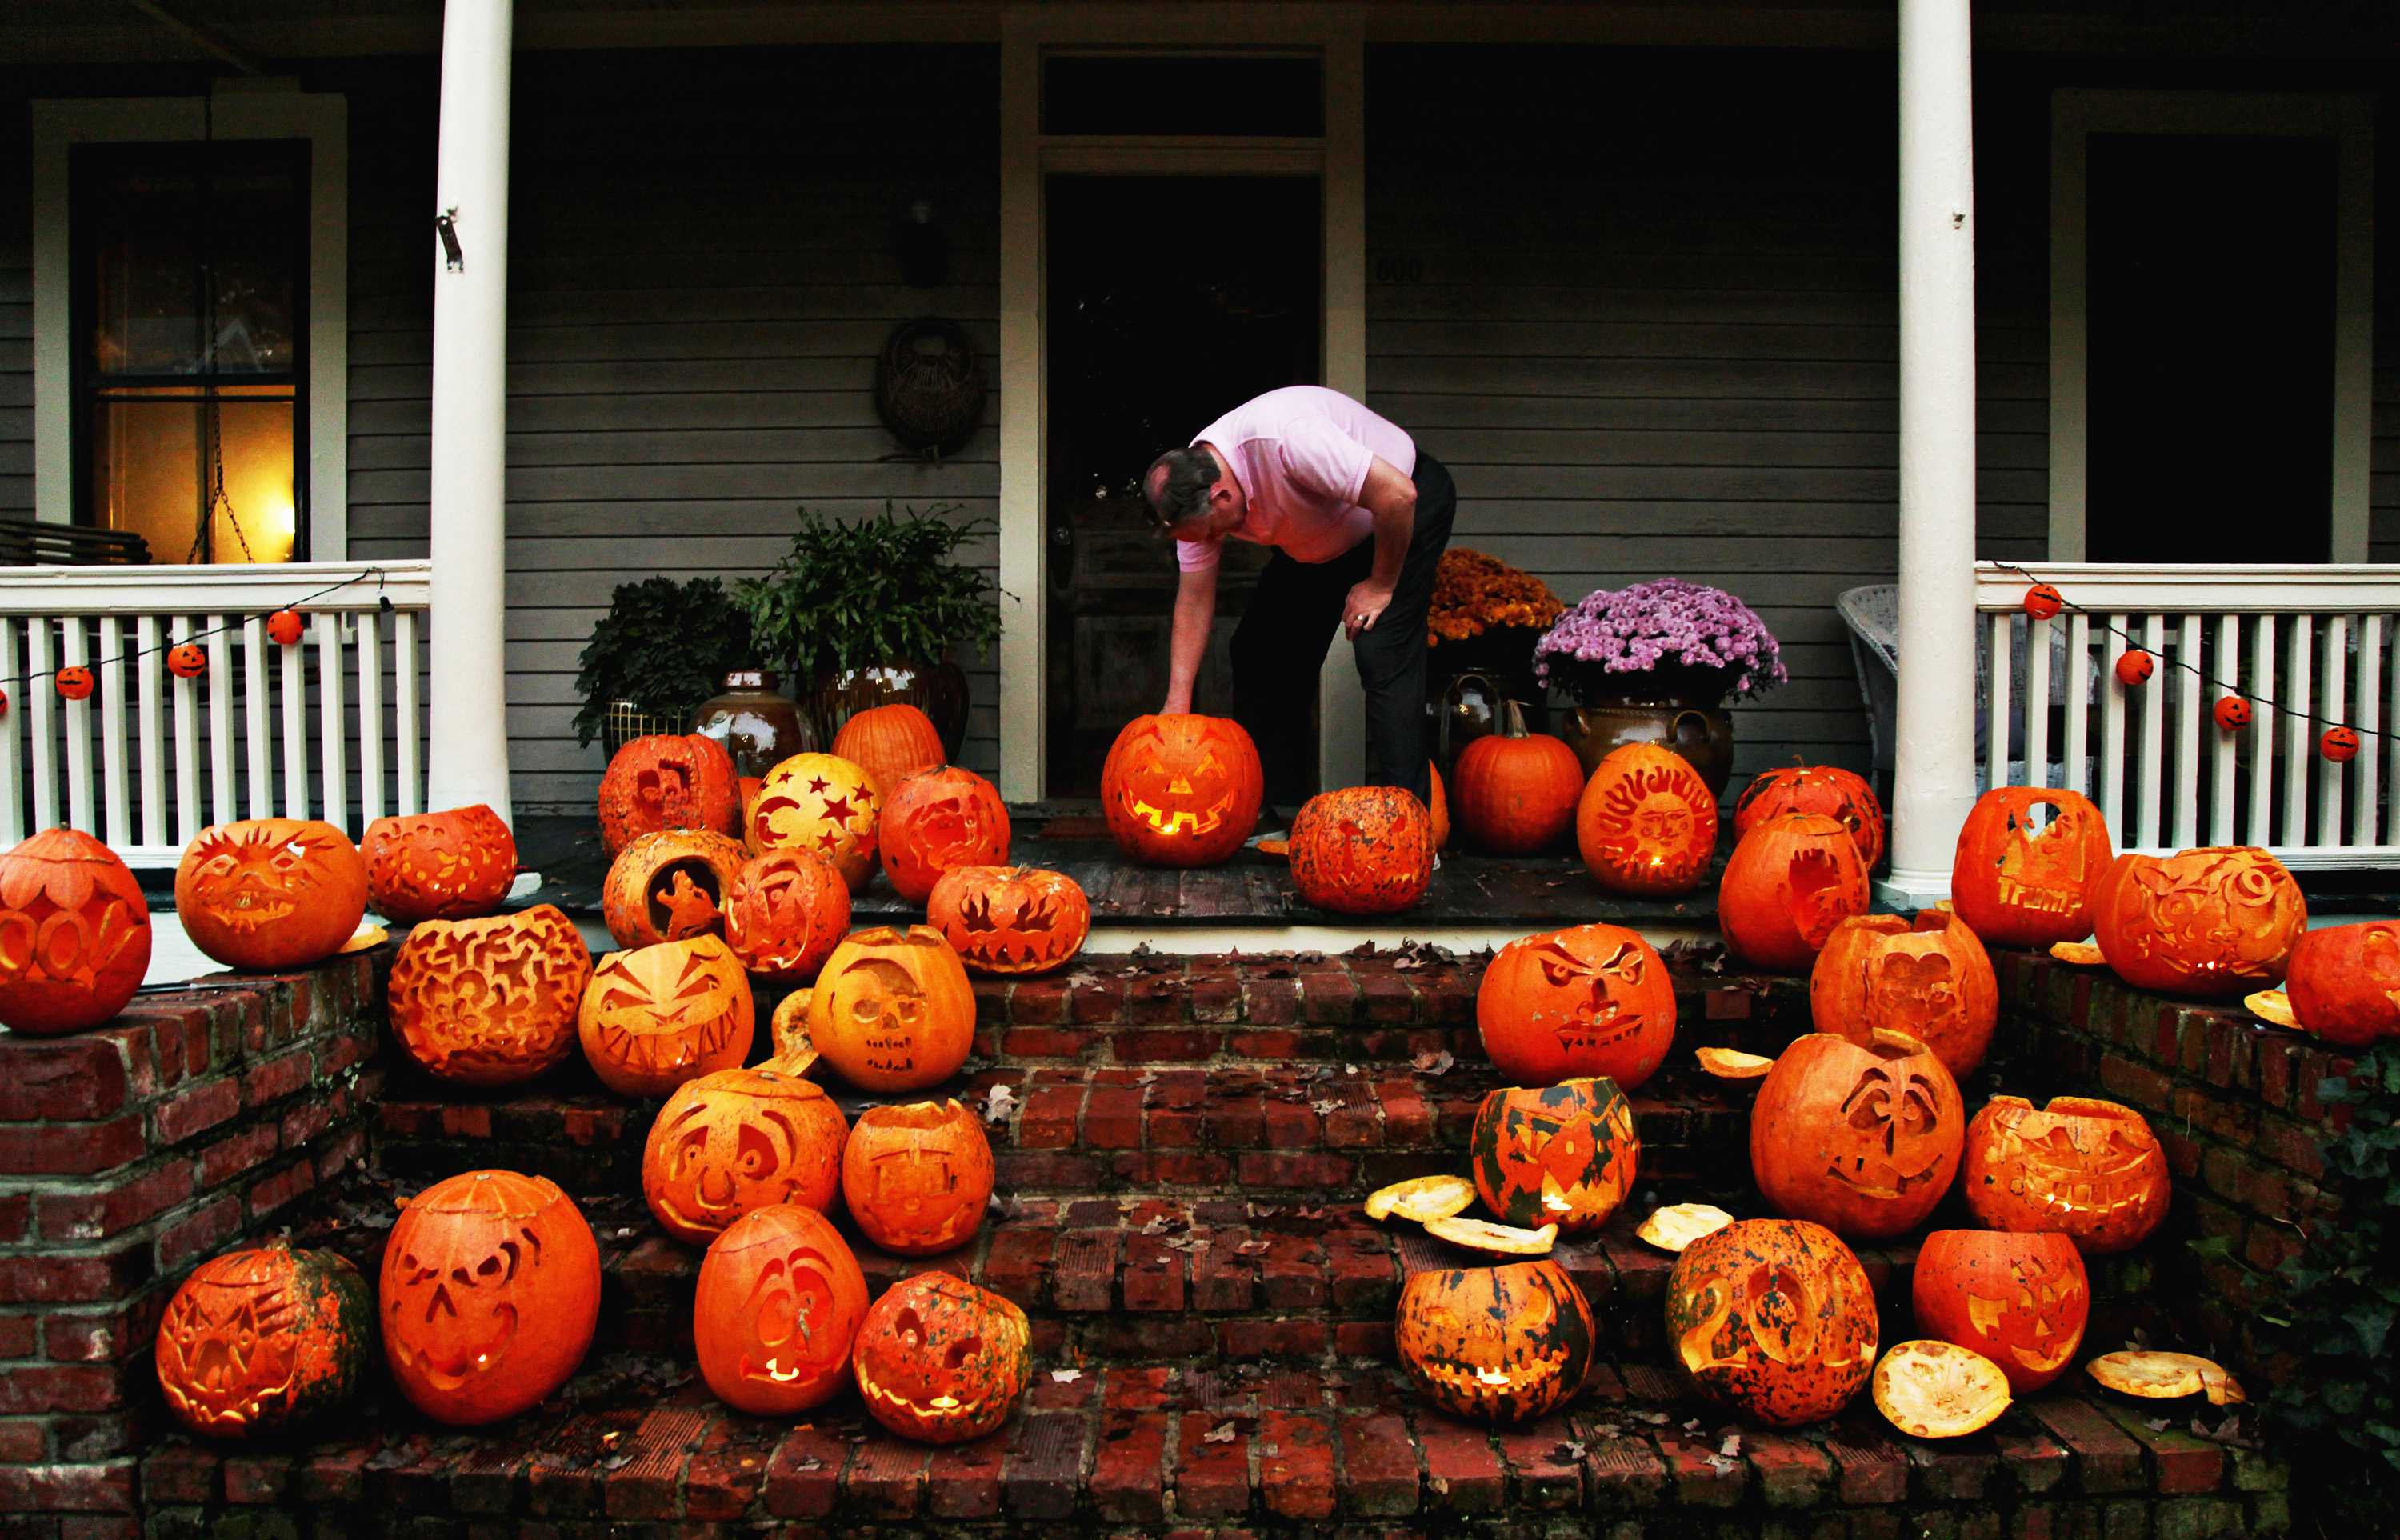 Man shown in front of house setting up approximately 20 different jack-o-lanterns